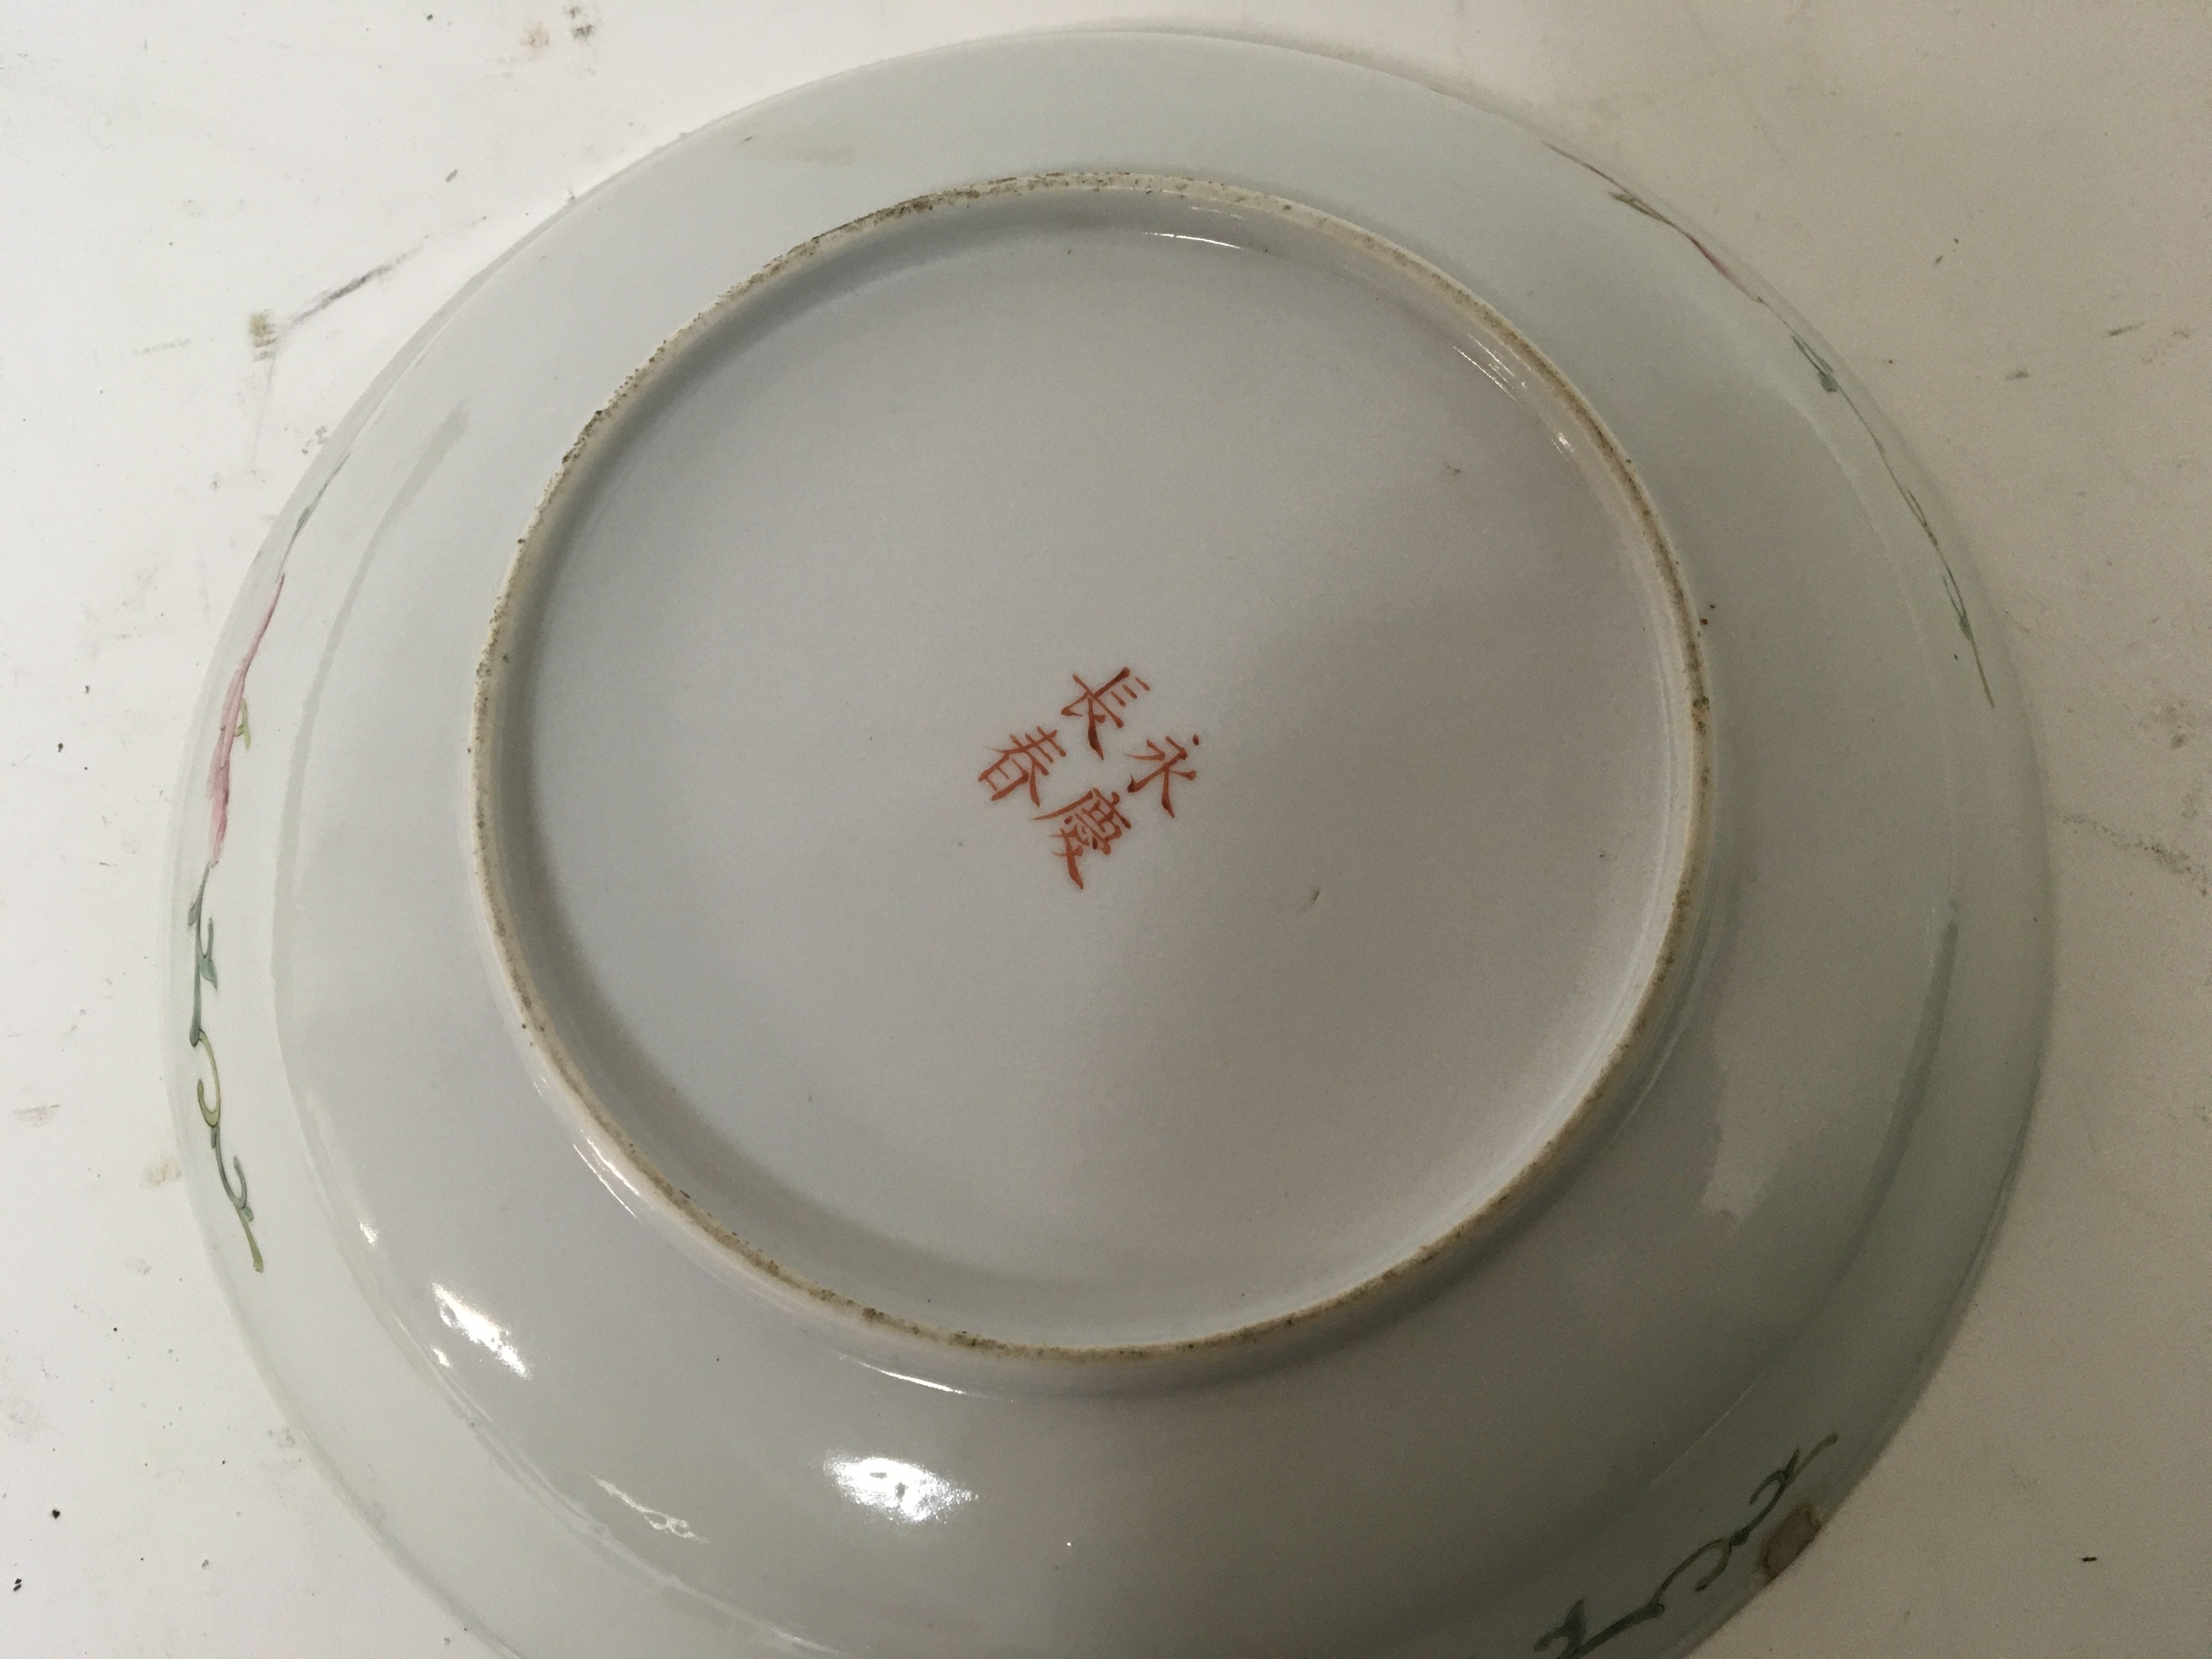 A Chinese export porcelain 19th century or earlier - Image 3 of 6